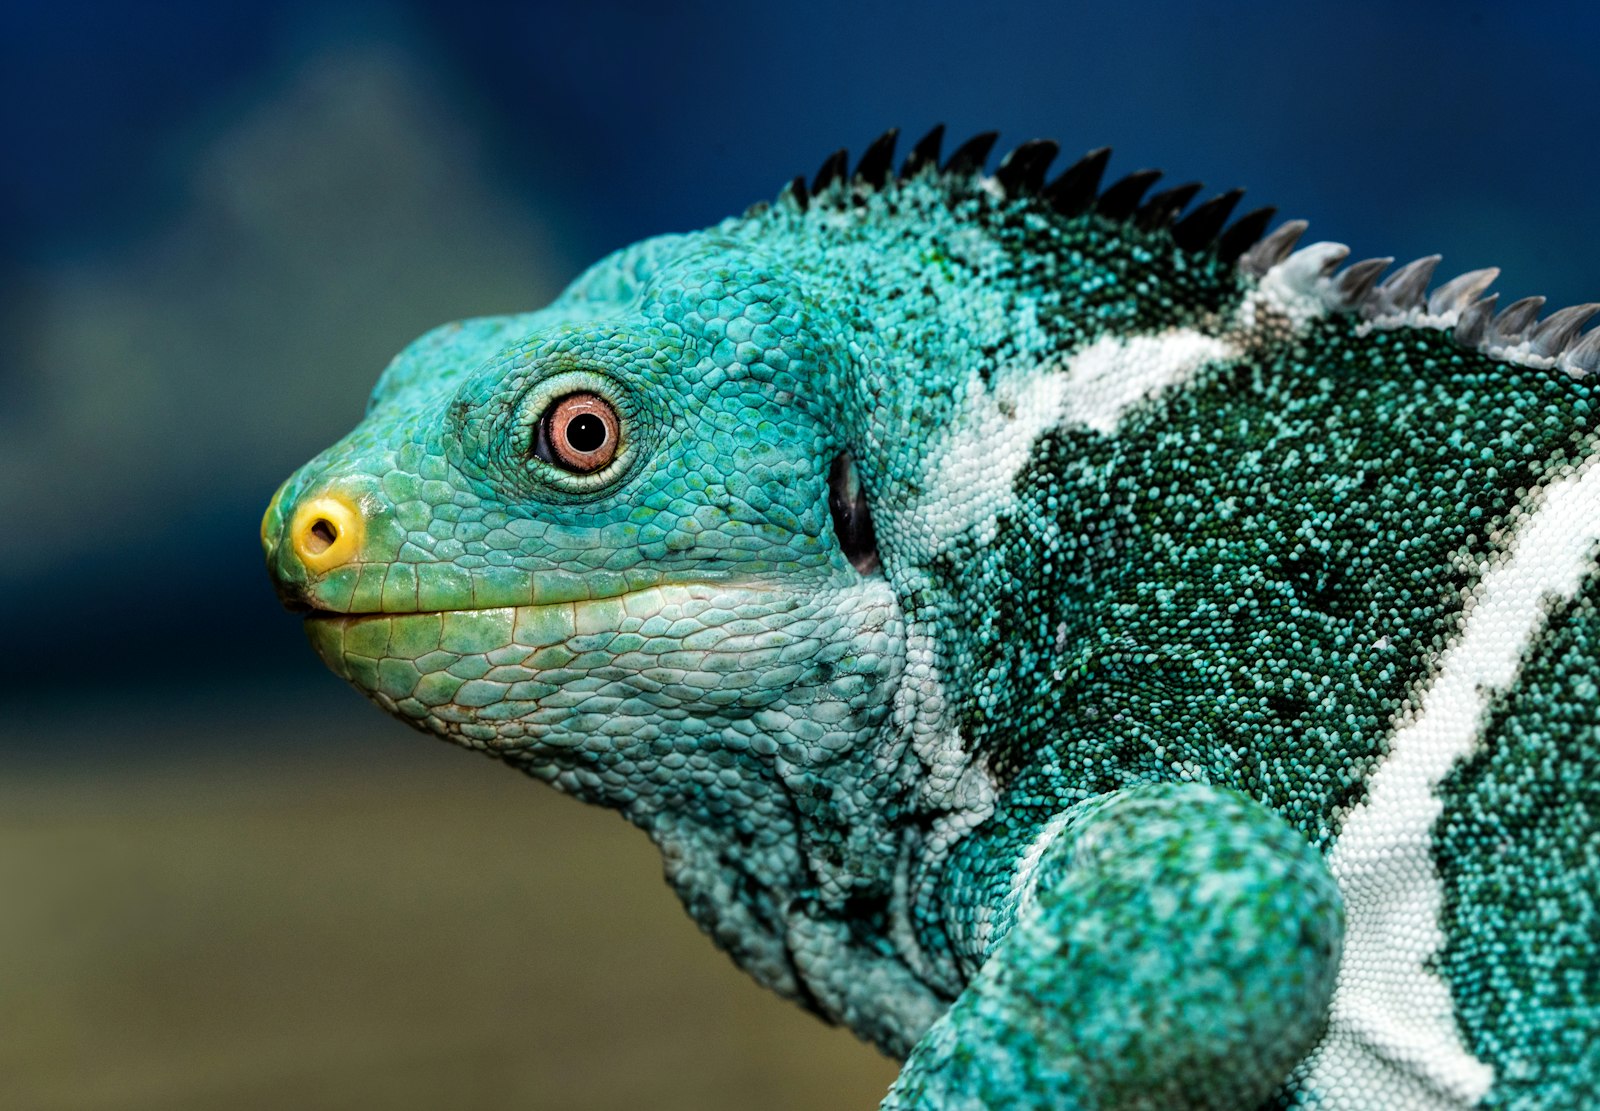 Tamron SP 90mm F2.8 Di VC USD 1:1 Macro (F004) sample photo. Teal and white chameleon photography